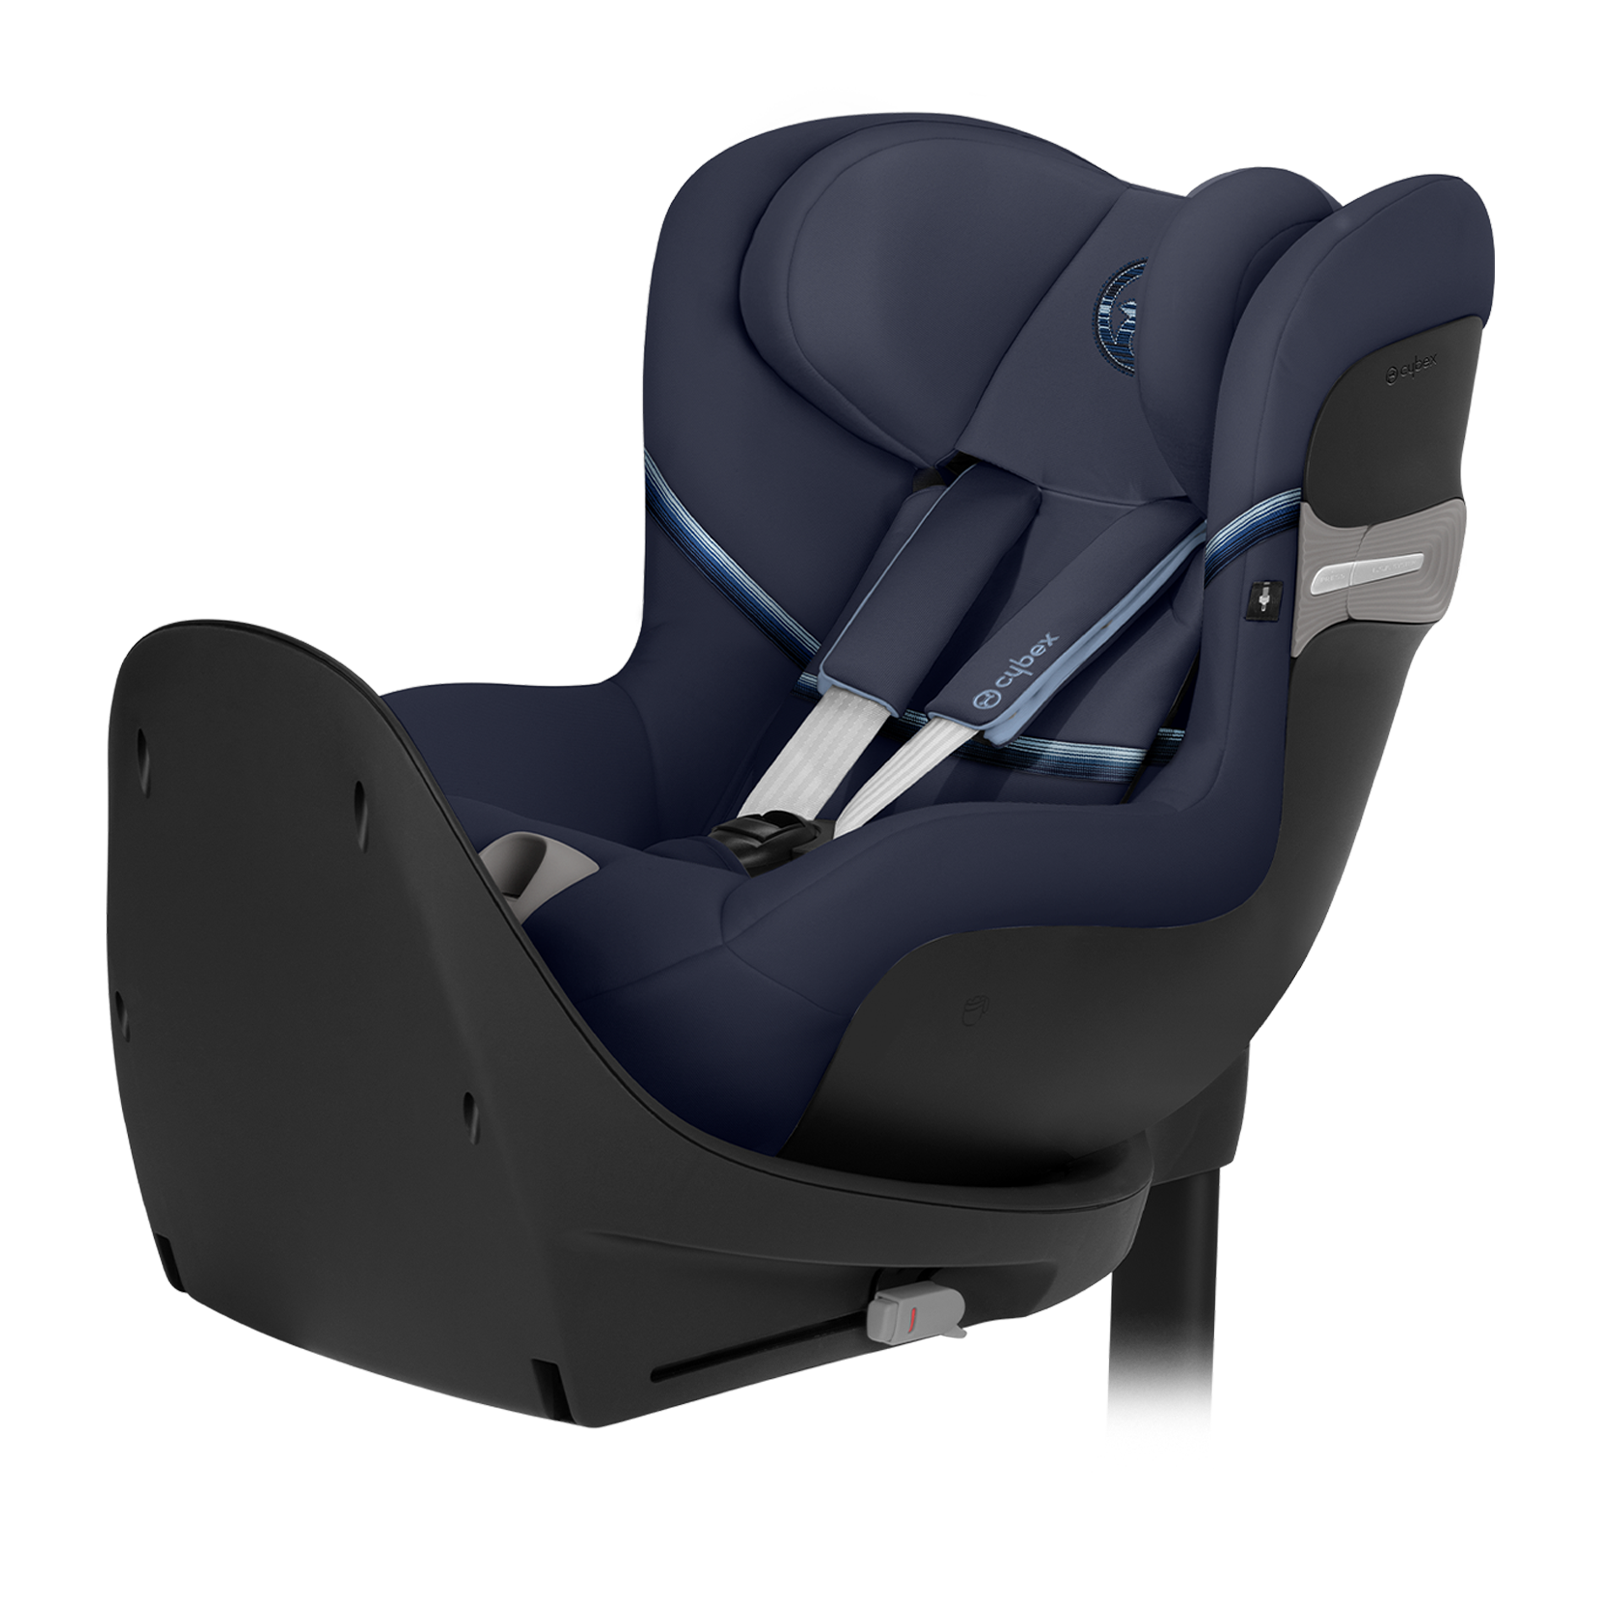 CYBEX Award Winner Car Seats - Only the Best for your Baby